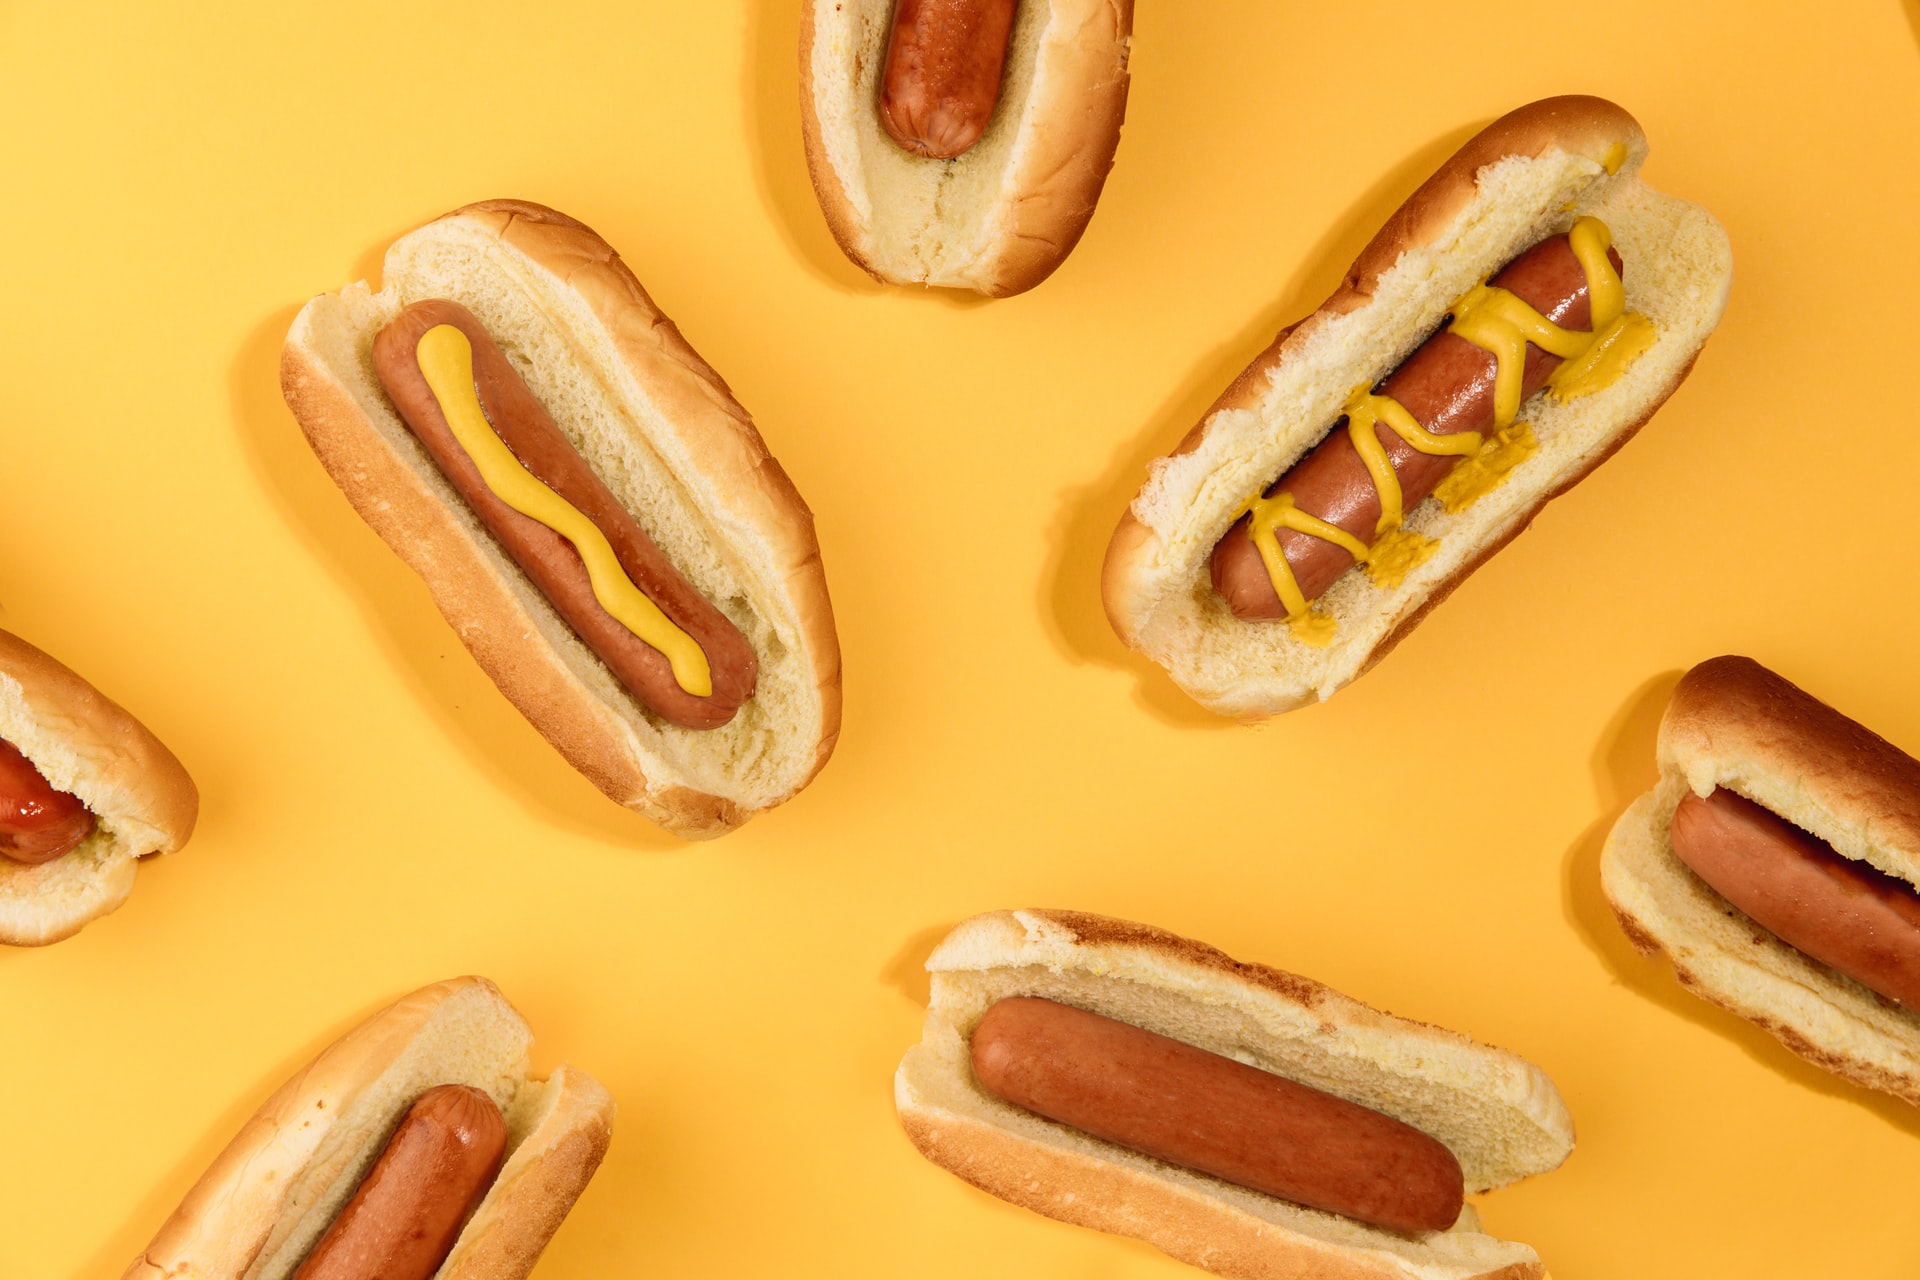 Can You Refreeze Hot Dogs?